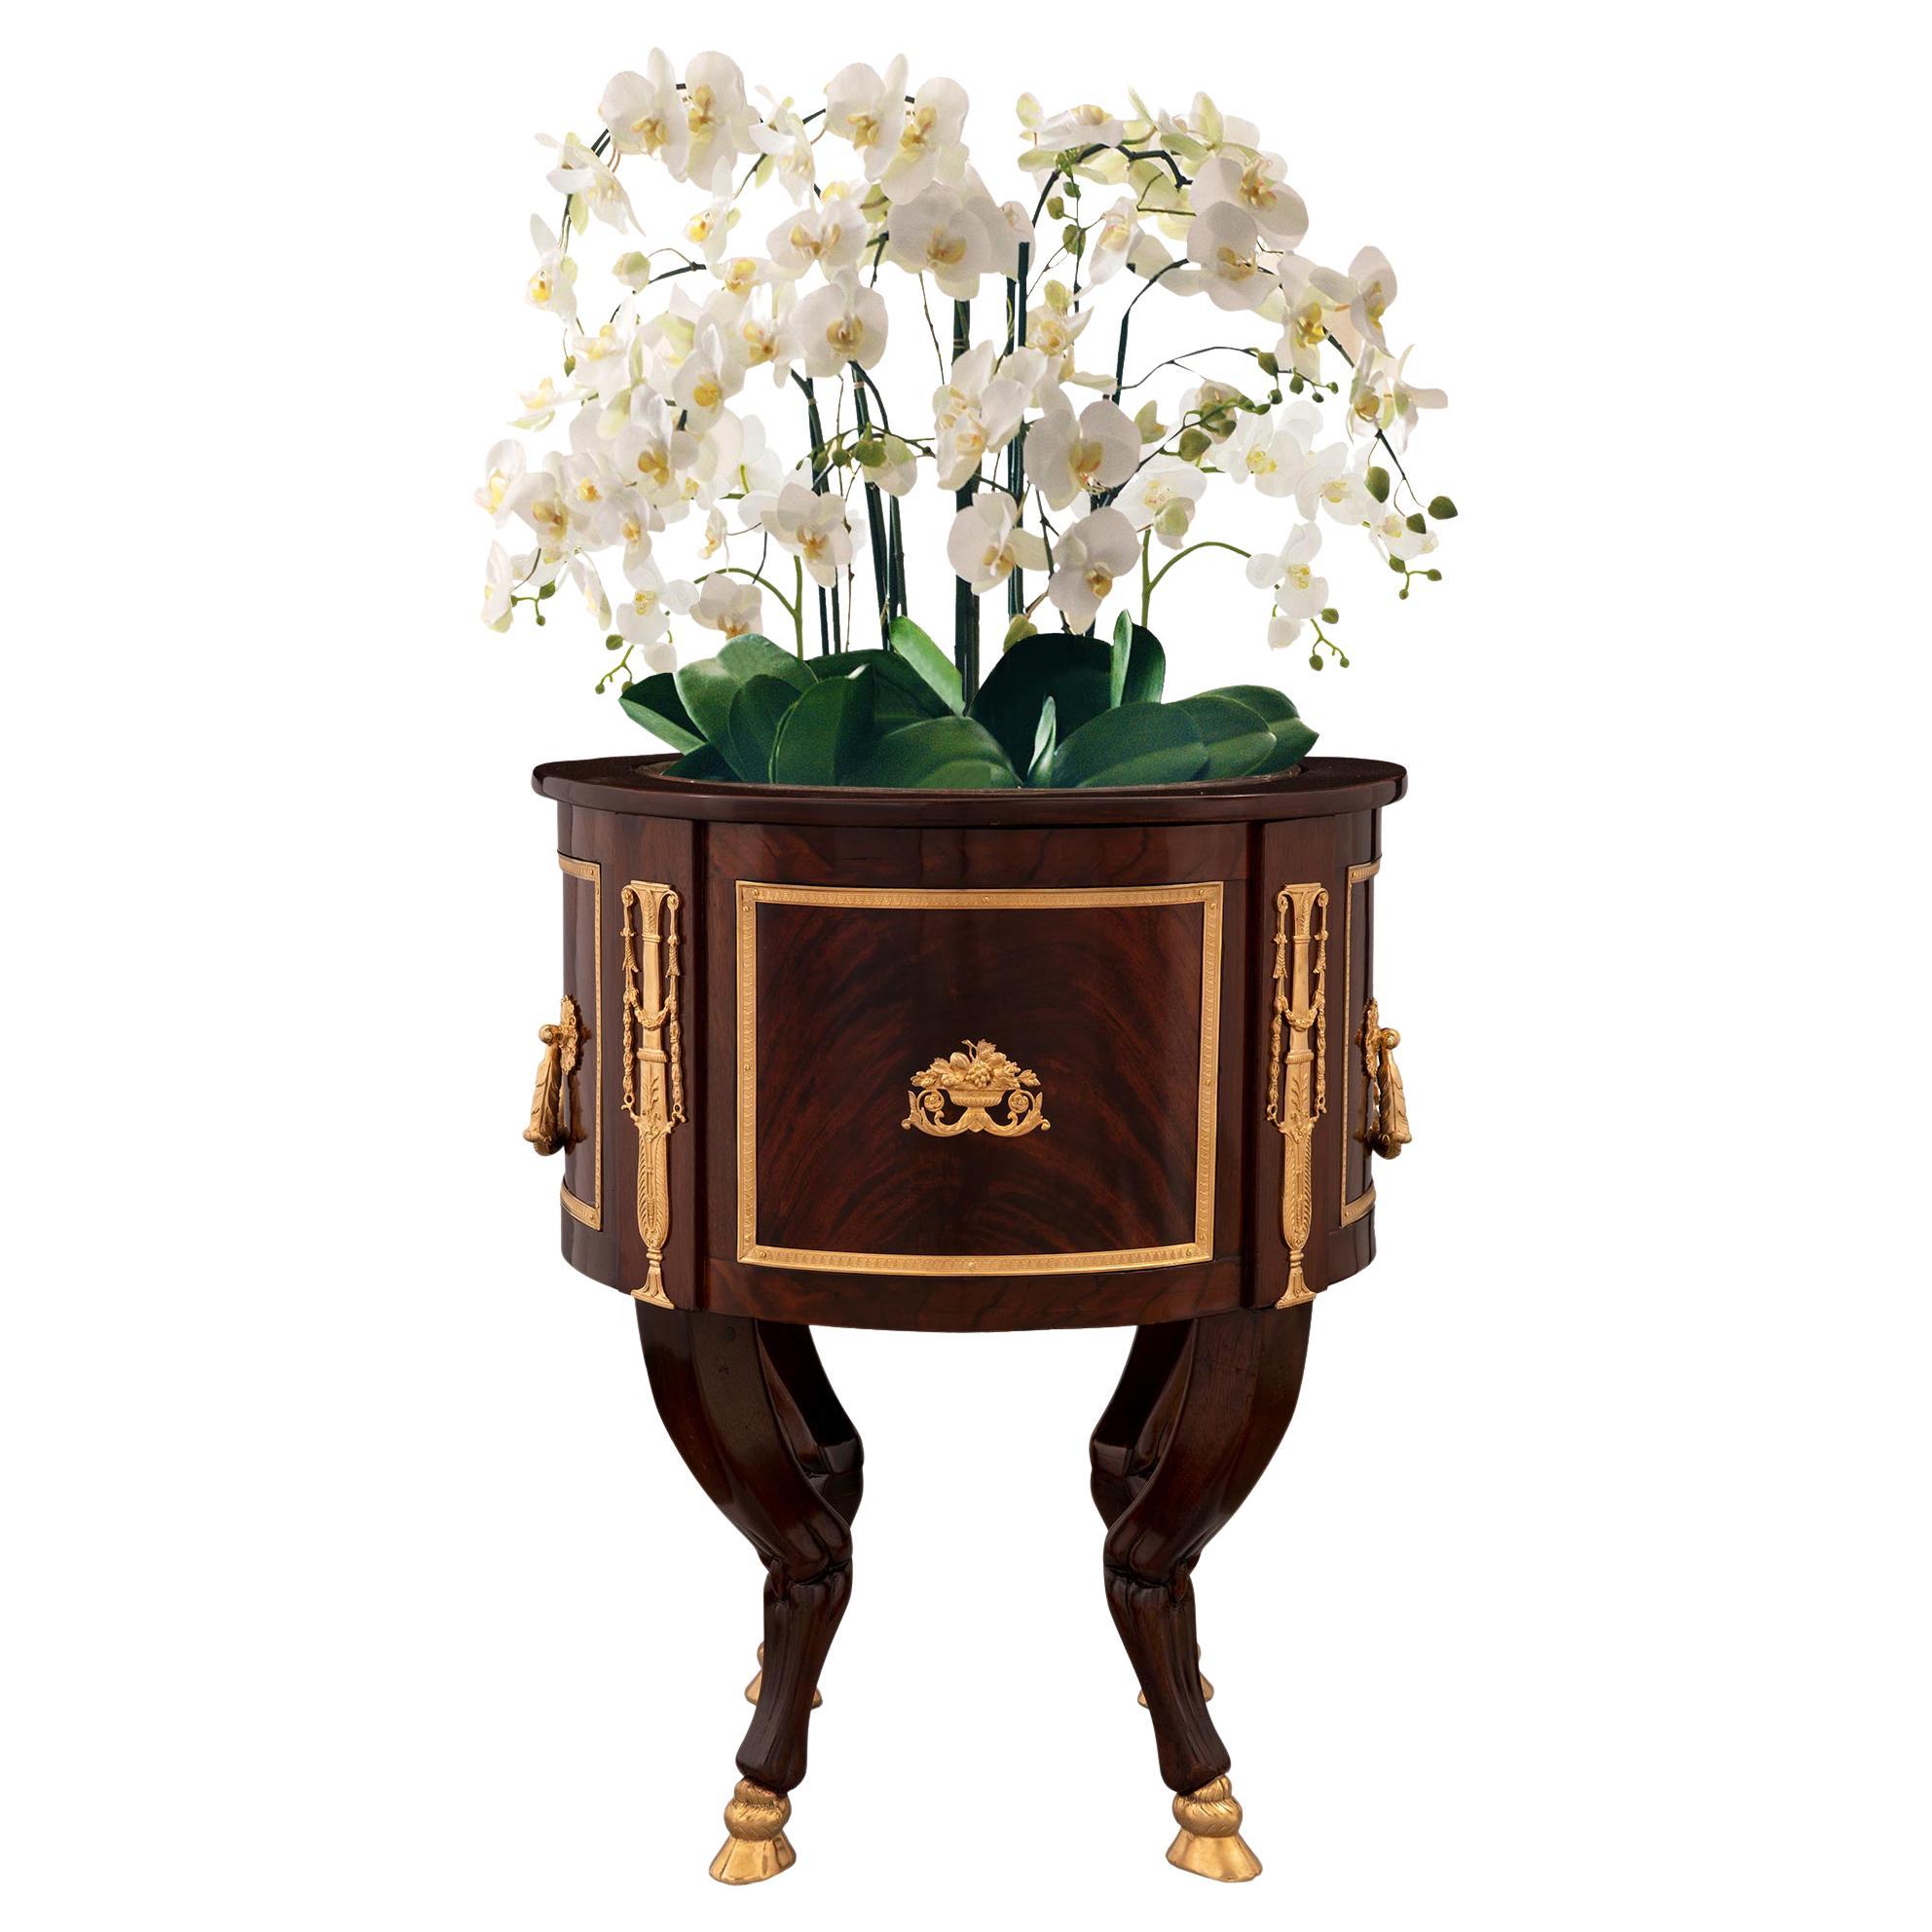 French 19th Century Neoclassical Style Mahogany and Ormolu Jardinière Planter For Sale